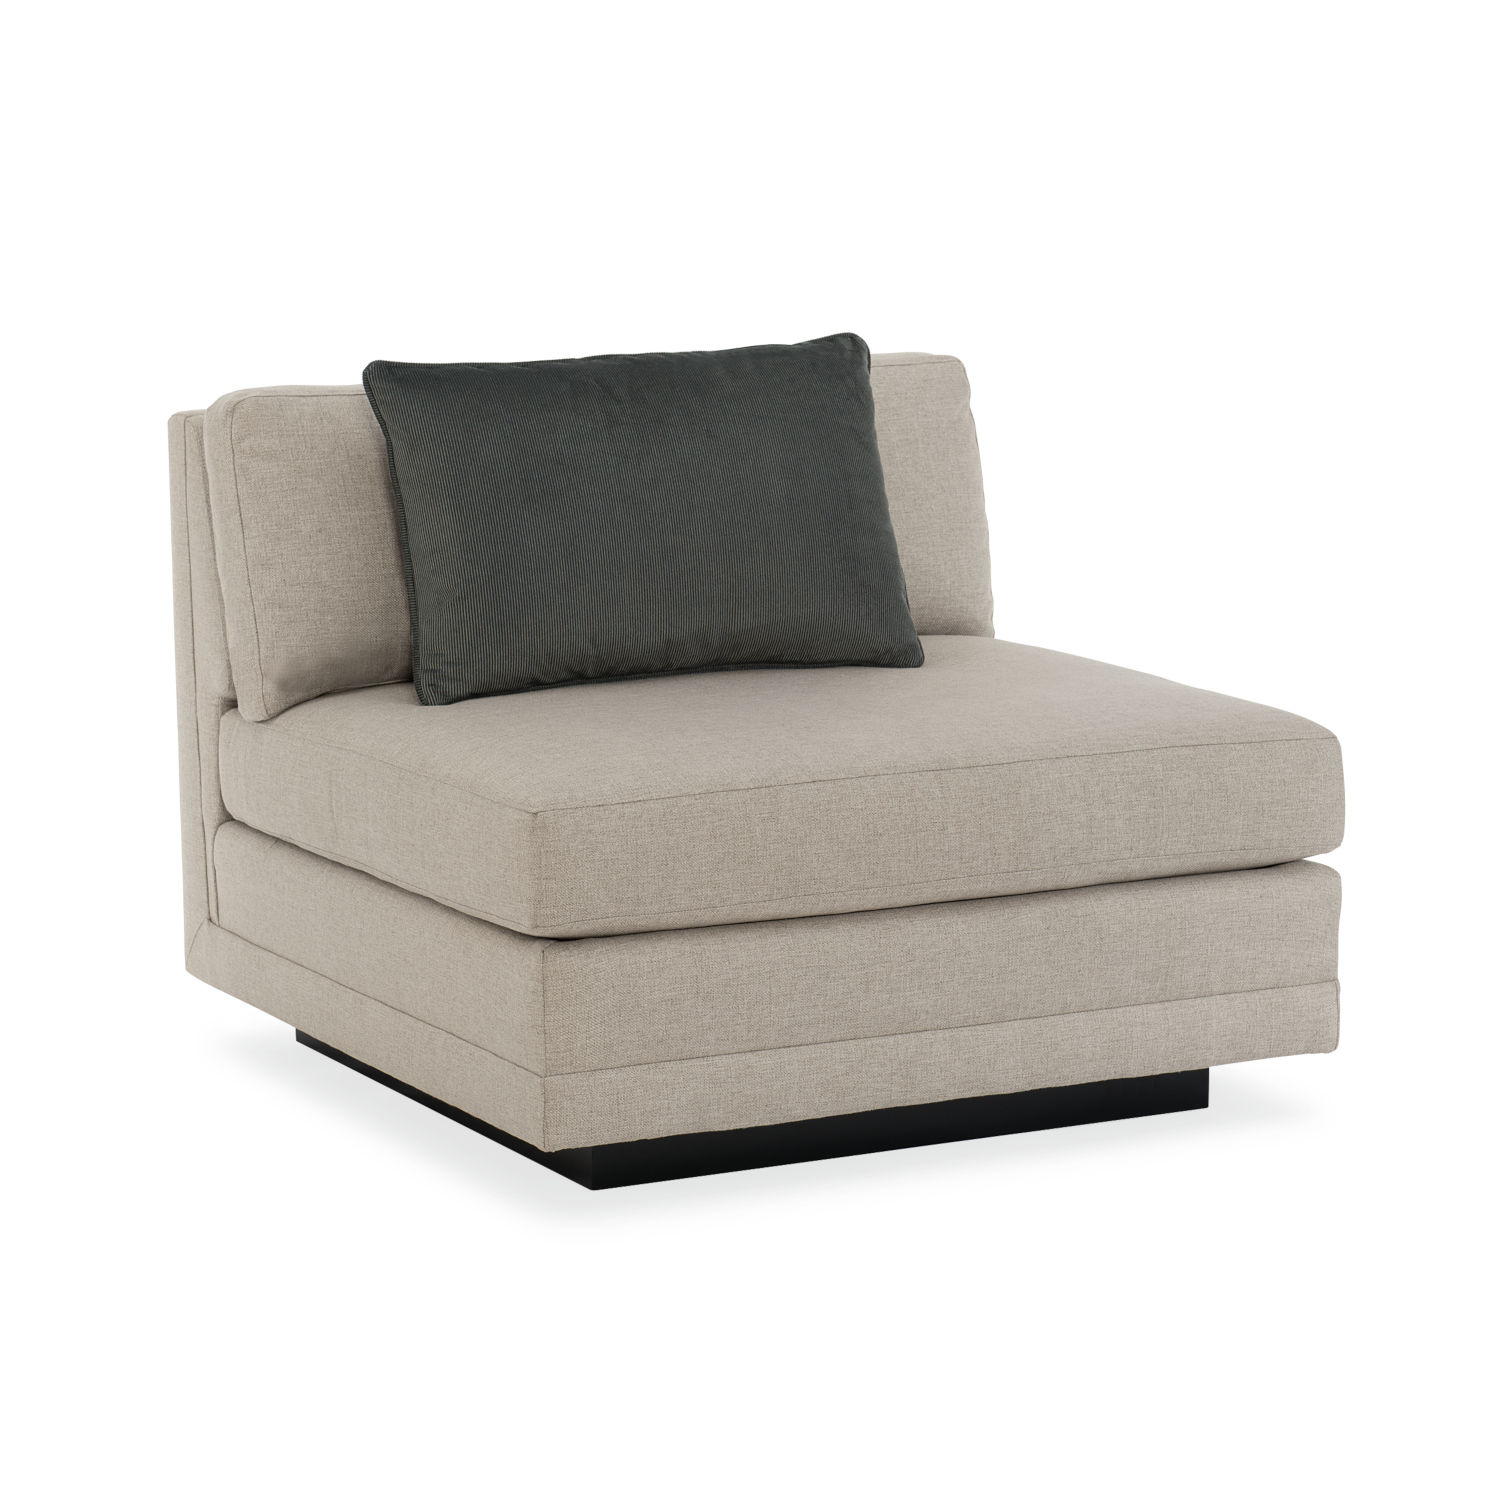 Sofas & Sectionals Category